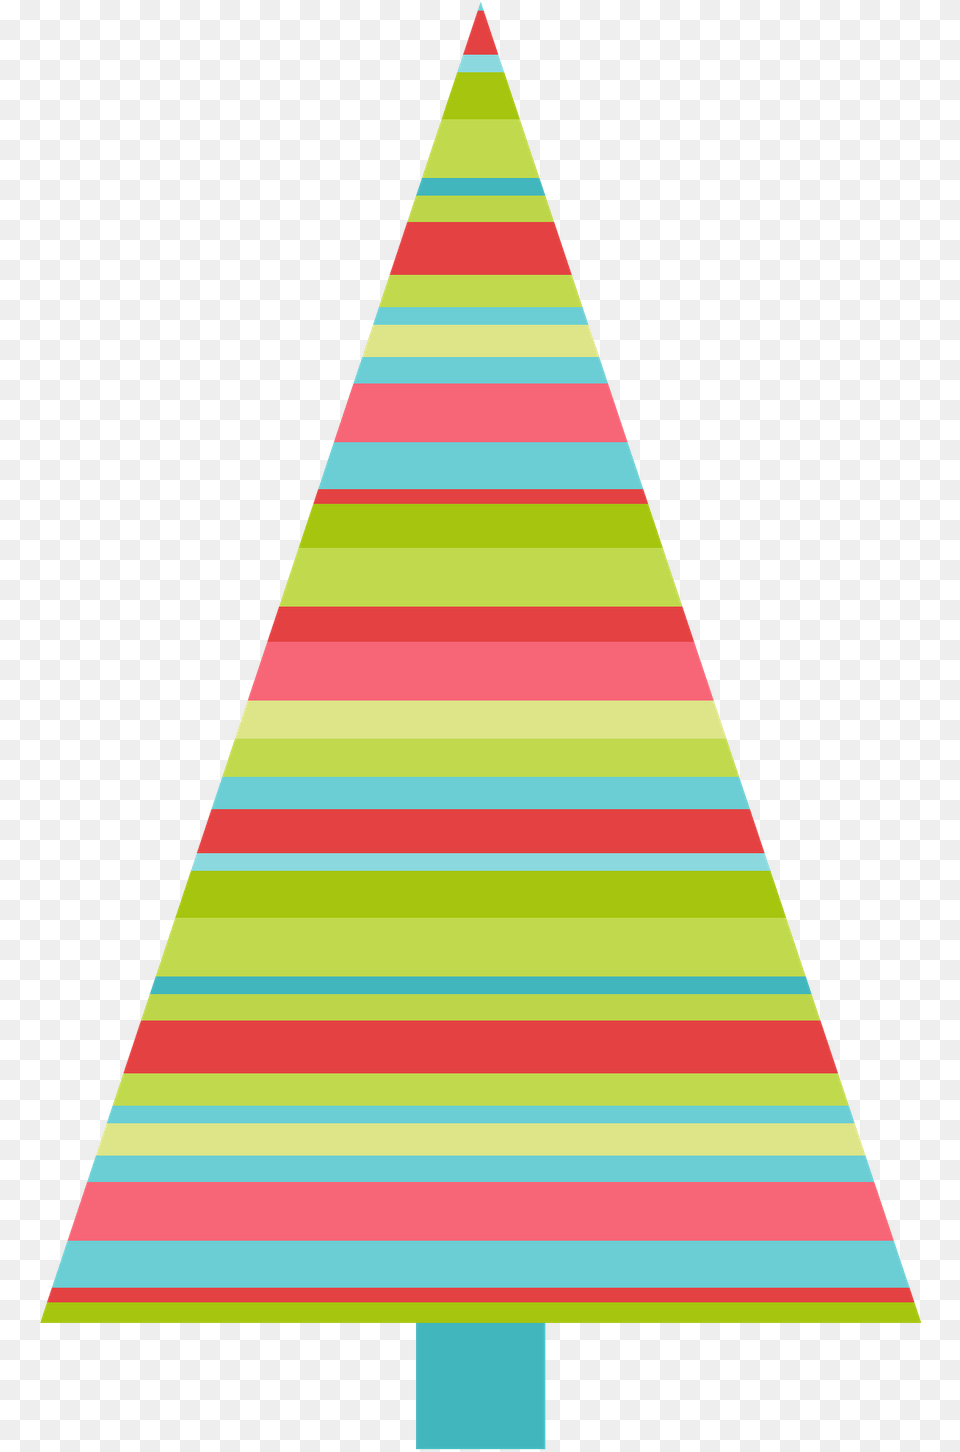 Colorful Christmas Tree Clip Art Colorful Christmas Clip Art, Triangle, Flag Png Image